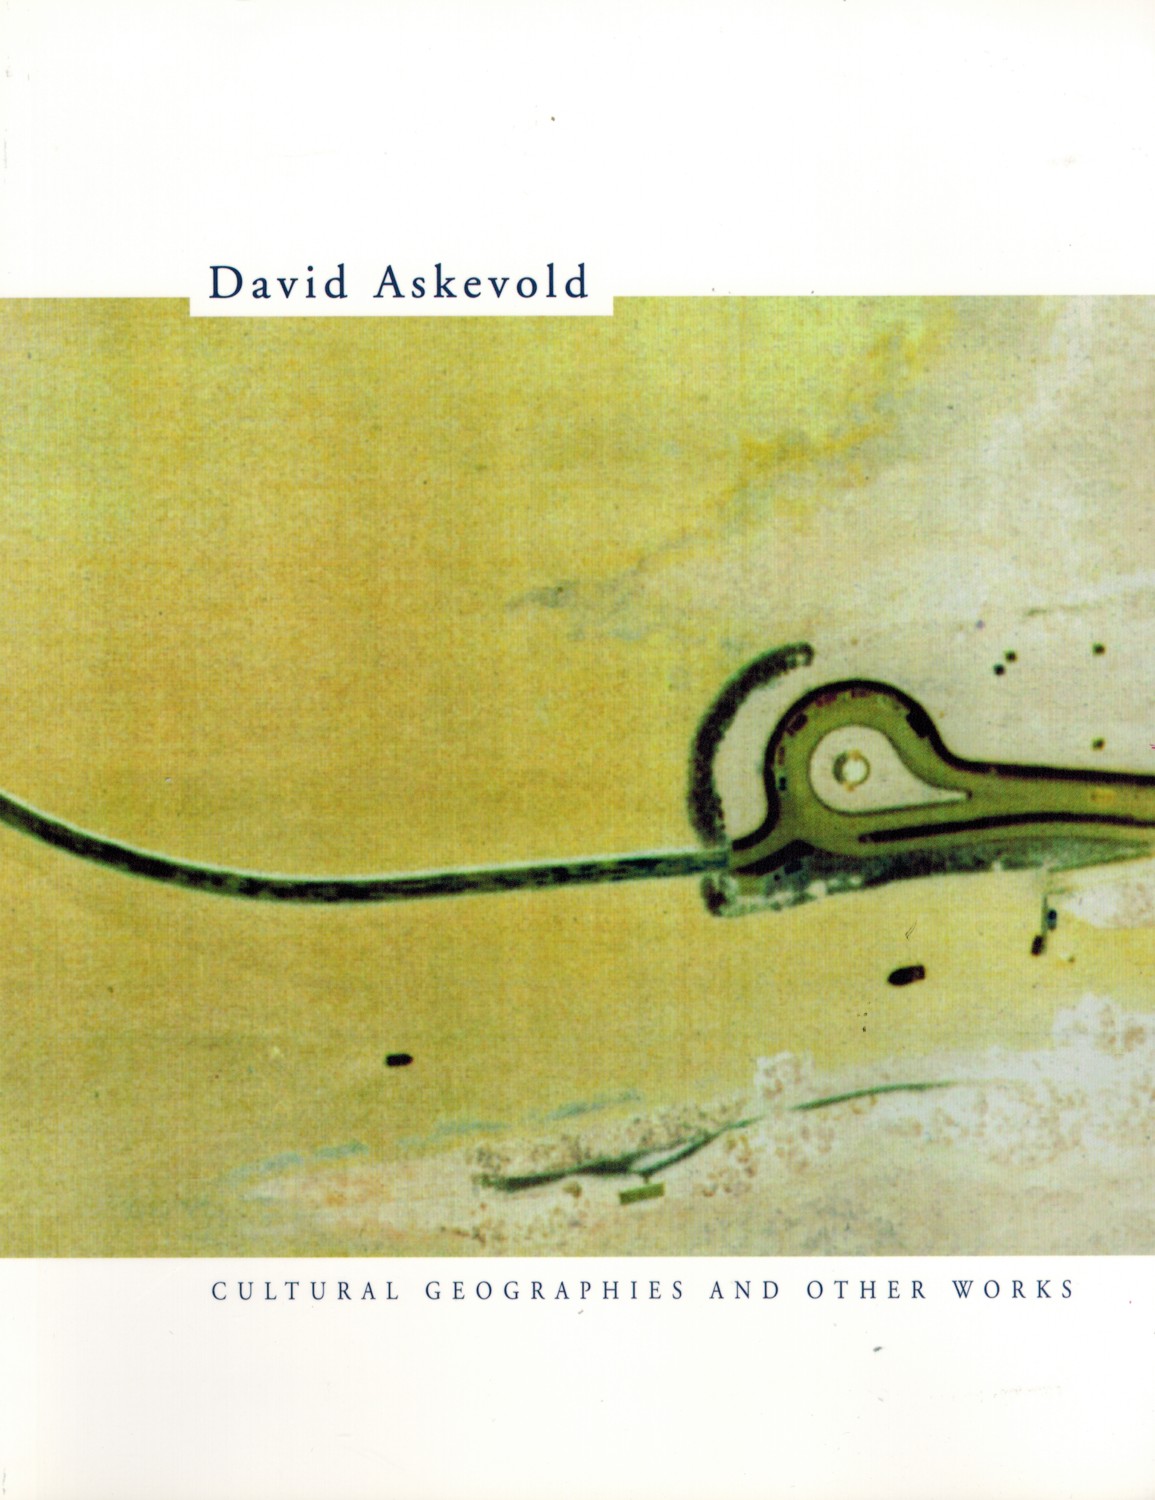 (ASKEVOLD, DAVID). Askevold, David, Mike Kelley, Cliff Eyland, Terry Graff & Petra Rigby Watson - DAVID ASKEVOLD: CULTURAL GEOGRAPHIES AND SELECTED WORKS